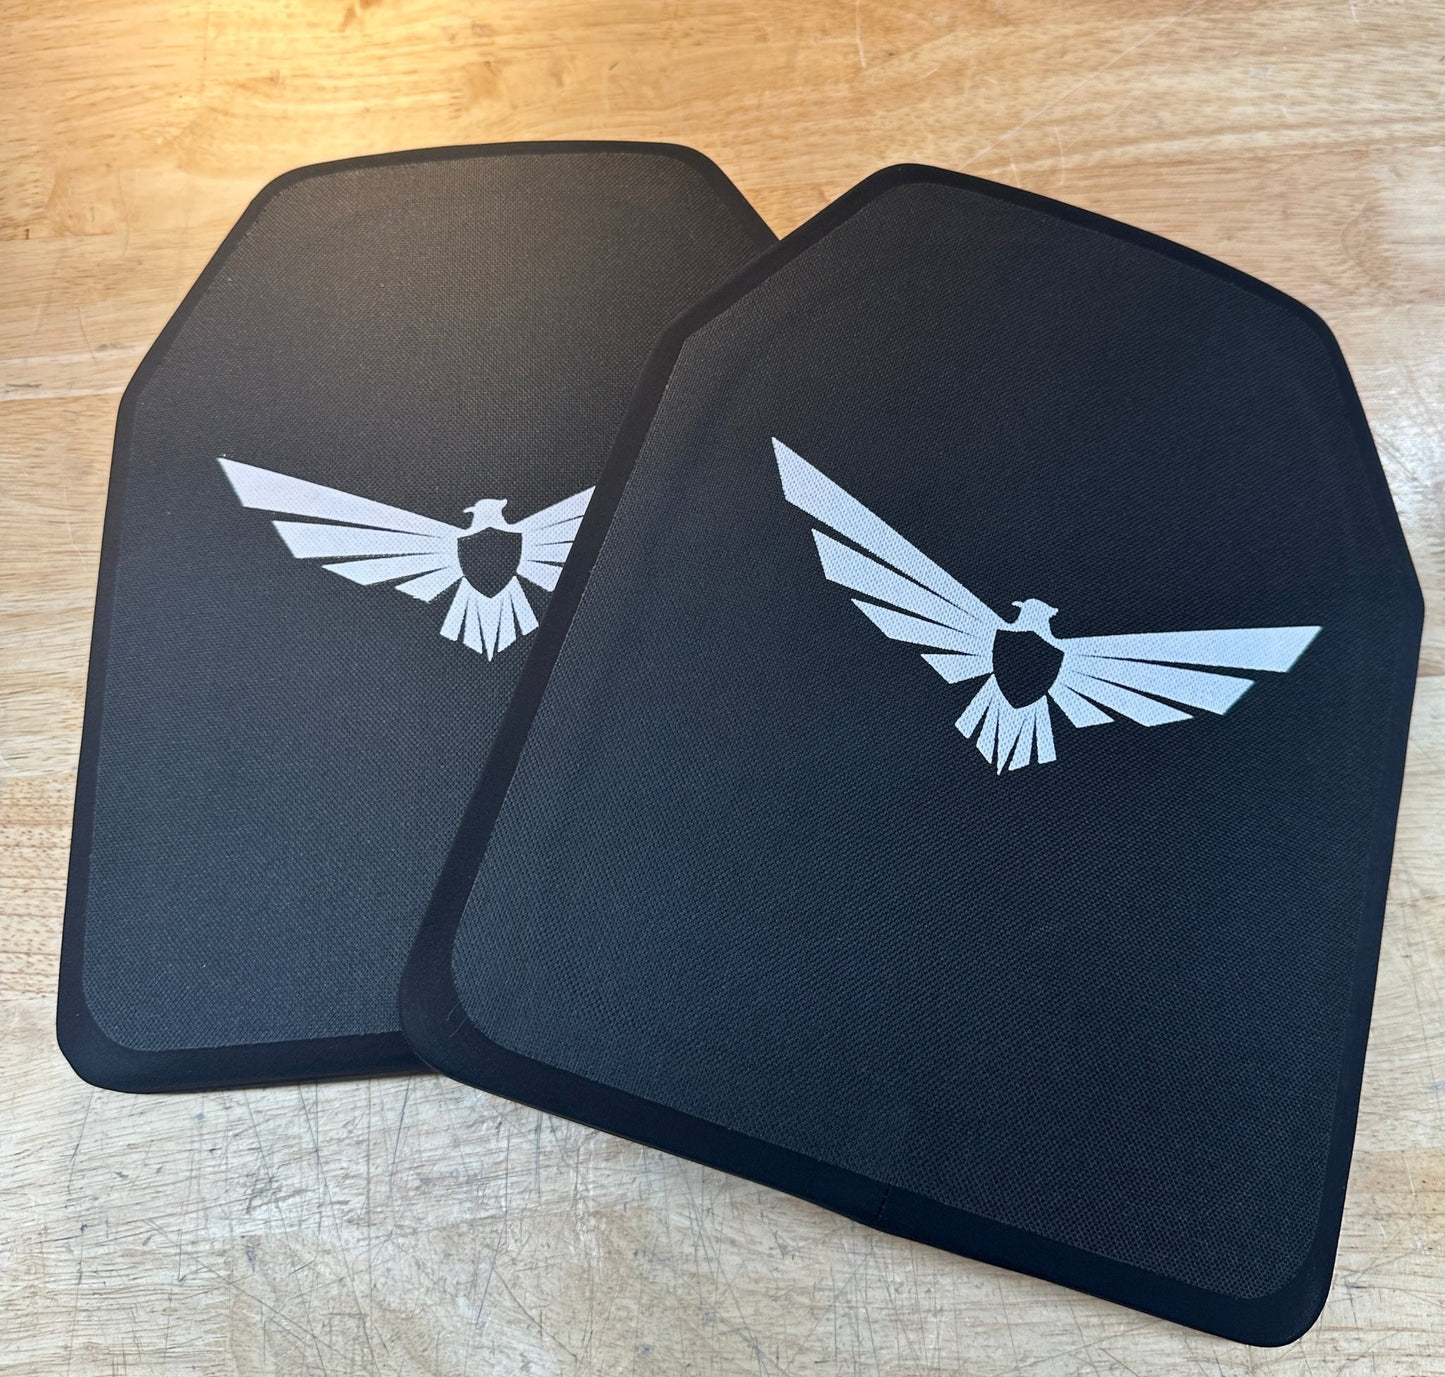 Set of 2, OA+ Series: RF2 (Level 3+) 10"X12" Standard Ceramic Ballistic Armor Rifle Plates - Multiple-Hit Capable and Tested - Gilliam Technical Services, Inc.